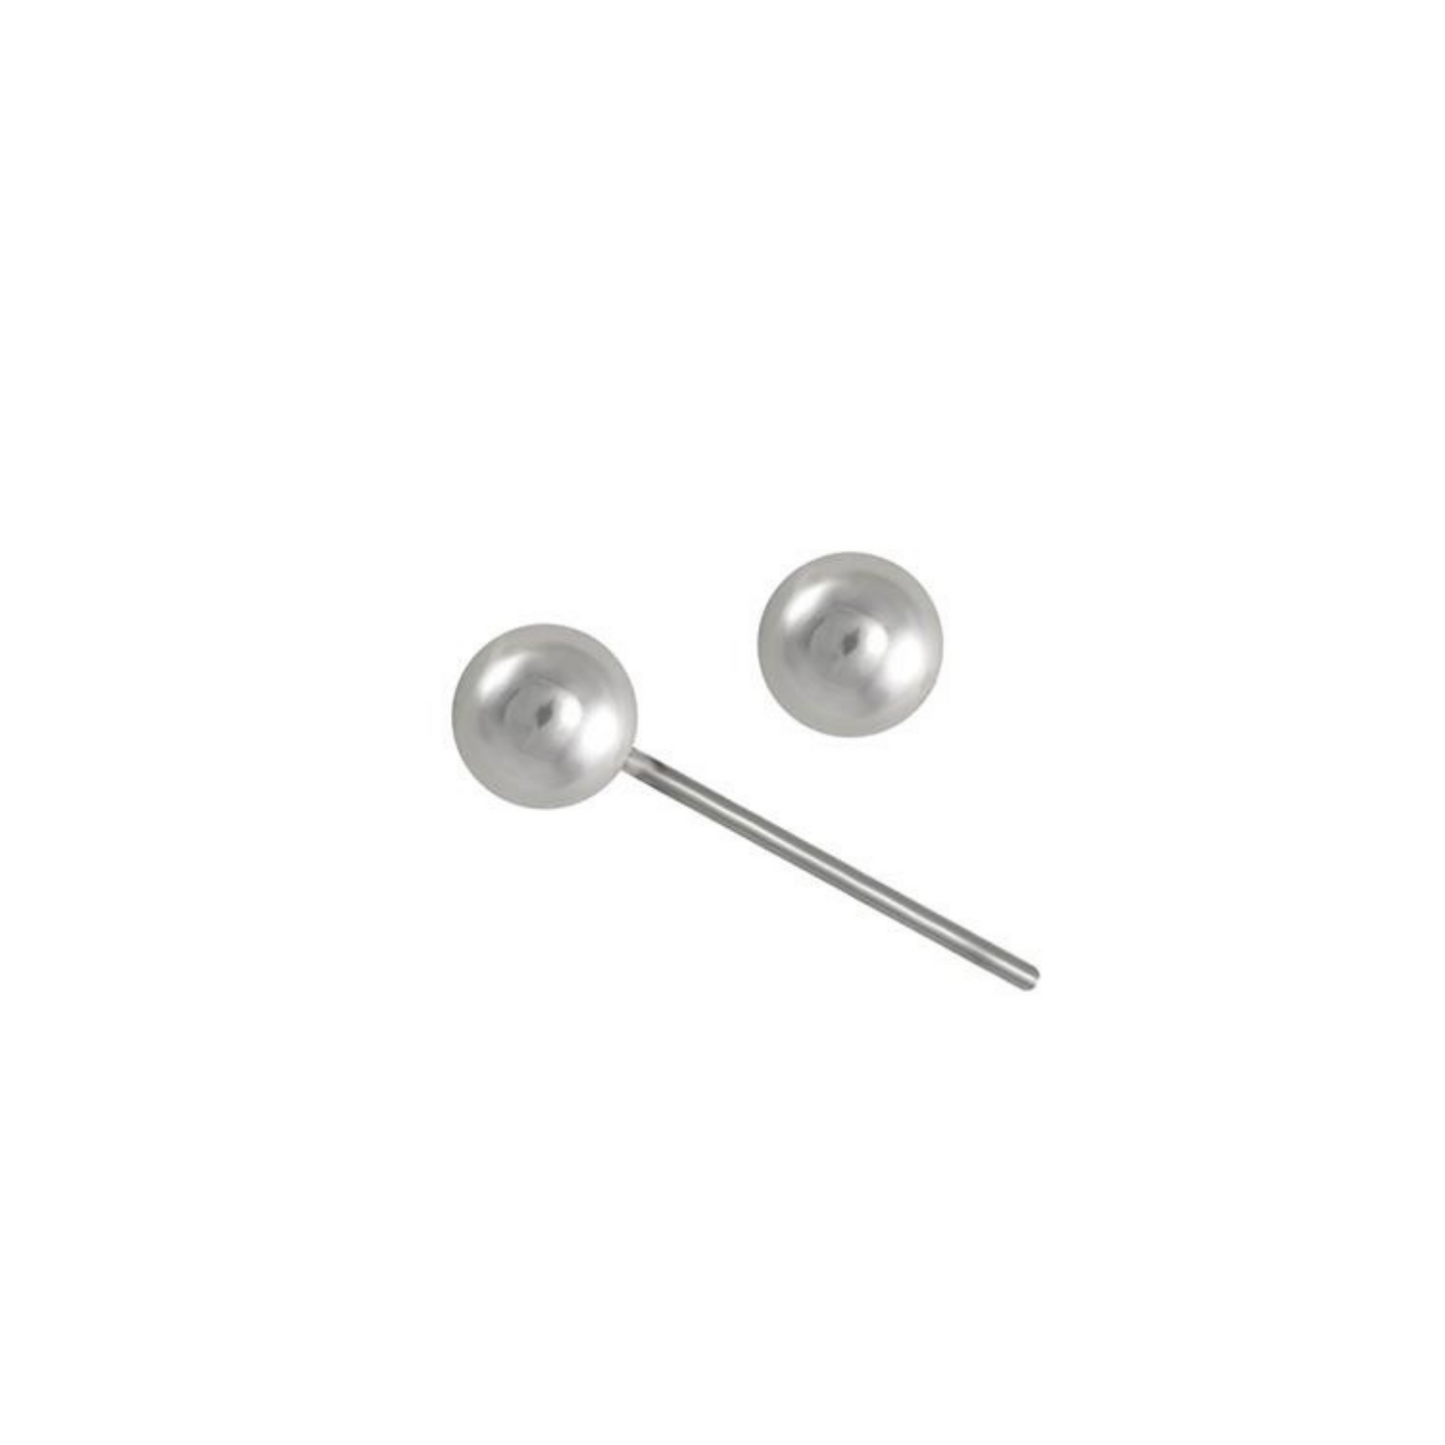 Penny 4mm Round Ball Stud Earrings, Silver - Zahra Jewelry